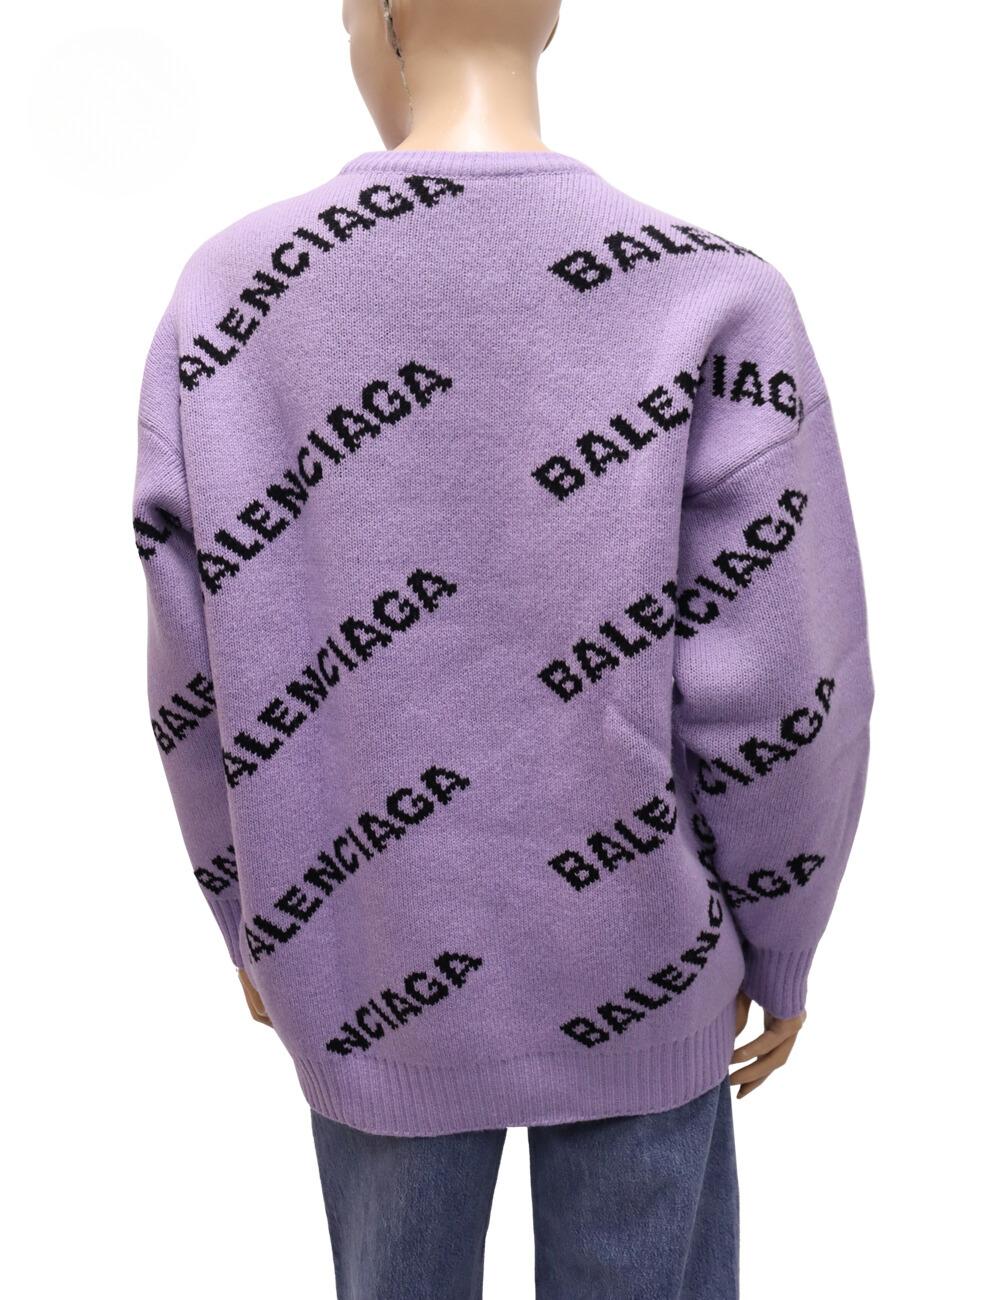 Balenciaga 2019 Collection by Demna Gvasalia Printed All Over Logo Sweater, Features Long Sleeve and Crew Neck.

Material:  98% Wool, 1% Elastane, 1% Polyamide
Size: EU 36 / Small (Oversize Fit)
Bust: 126cm
Waist: 116cm
Overall Condition: Excellent